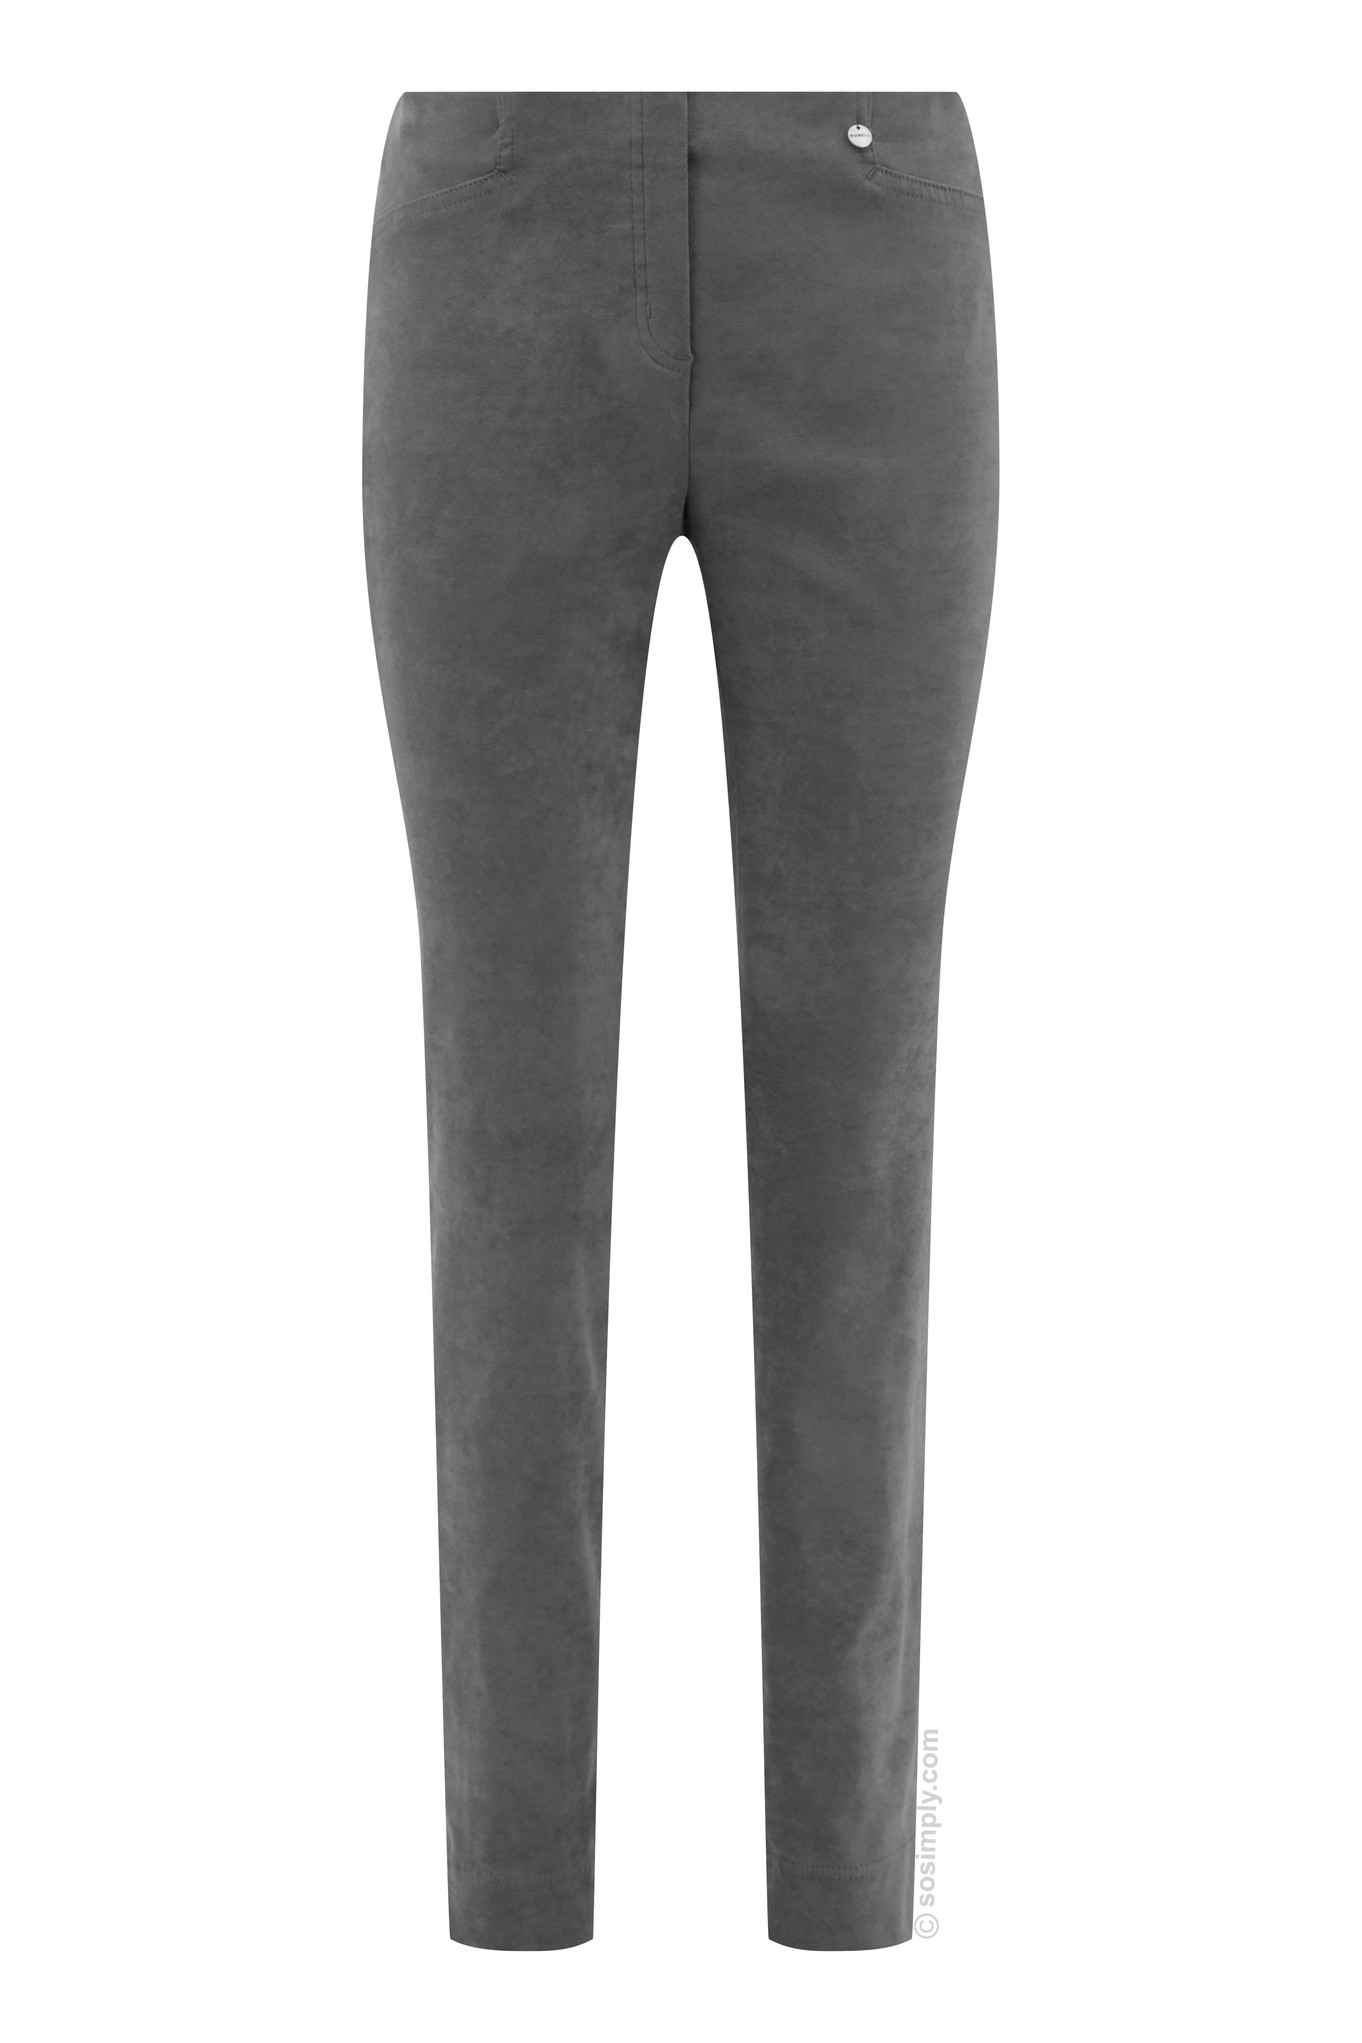 Robell Rose Stretch Faux Suede Trouser